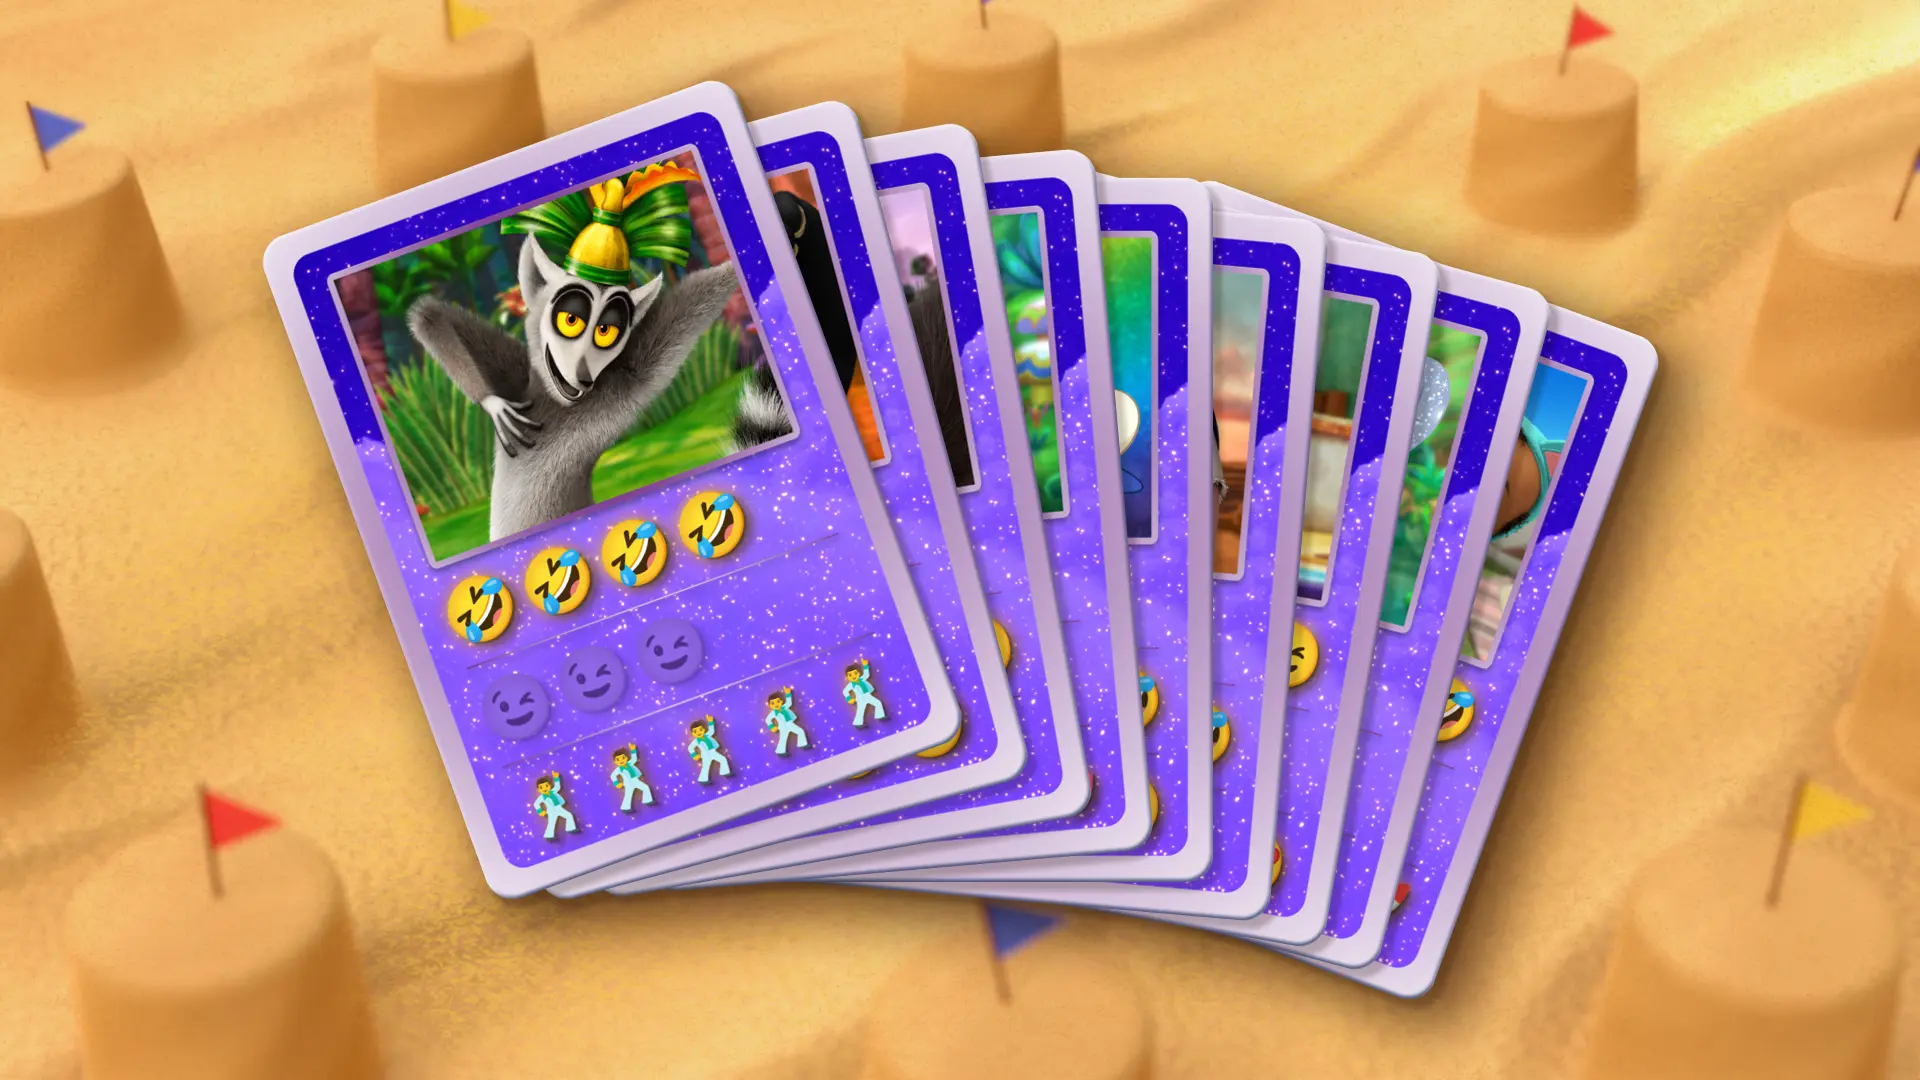 Dreamdeck summer card game set at the beach to celebrate the summer season on DreamWorks TV.